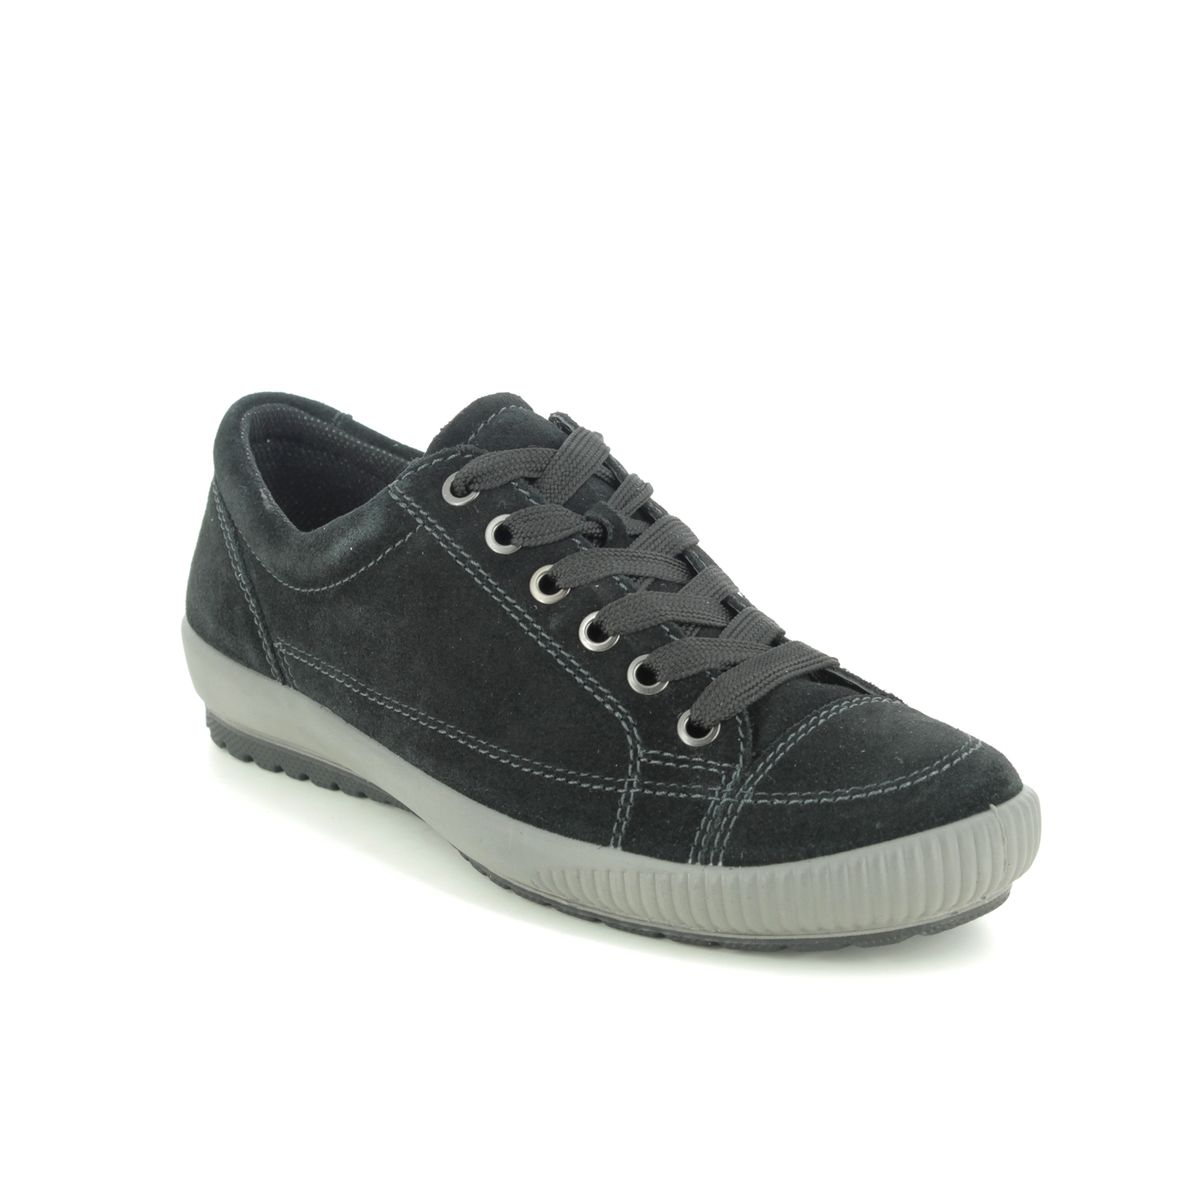 Legero Tanaro Stitch Black Suede Womens Lacing Shoes 0800820-0000 In Size 8 In Plain Black Suede